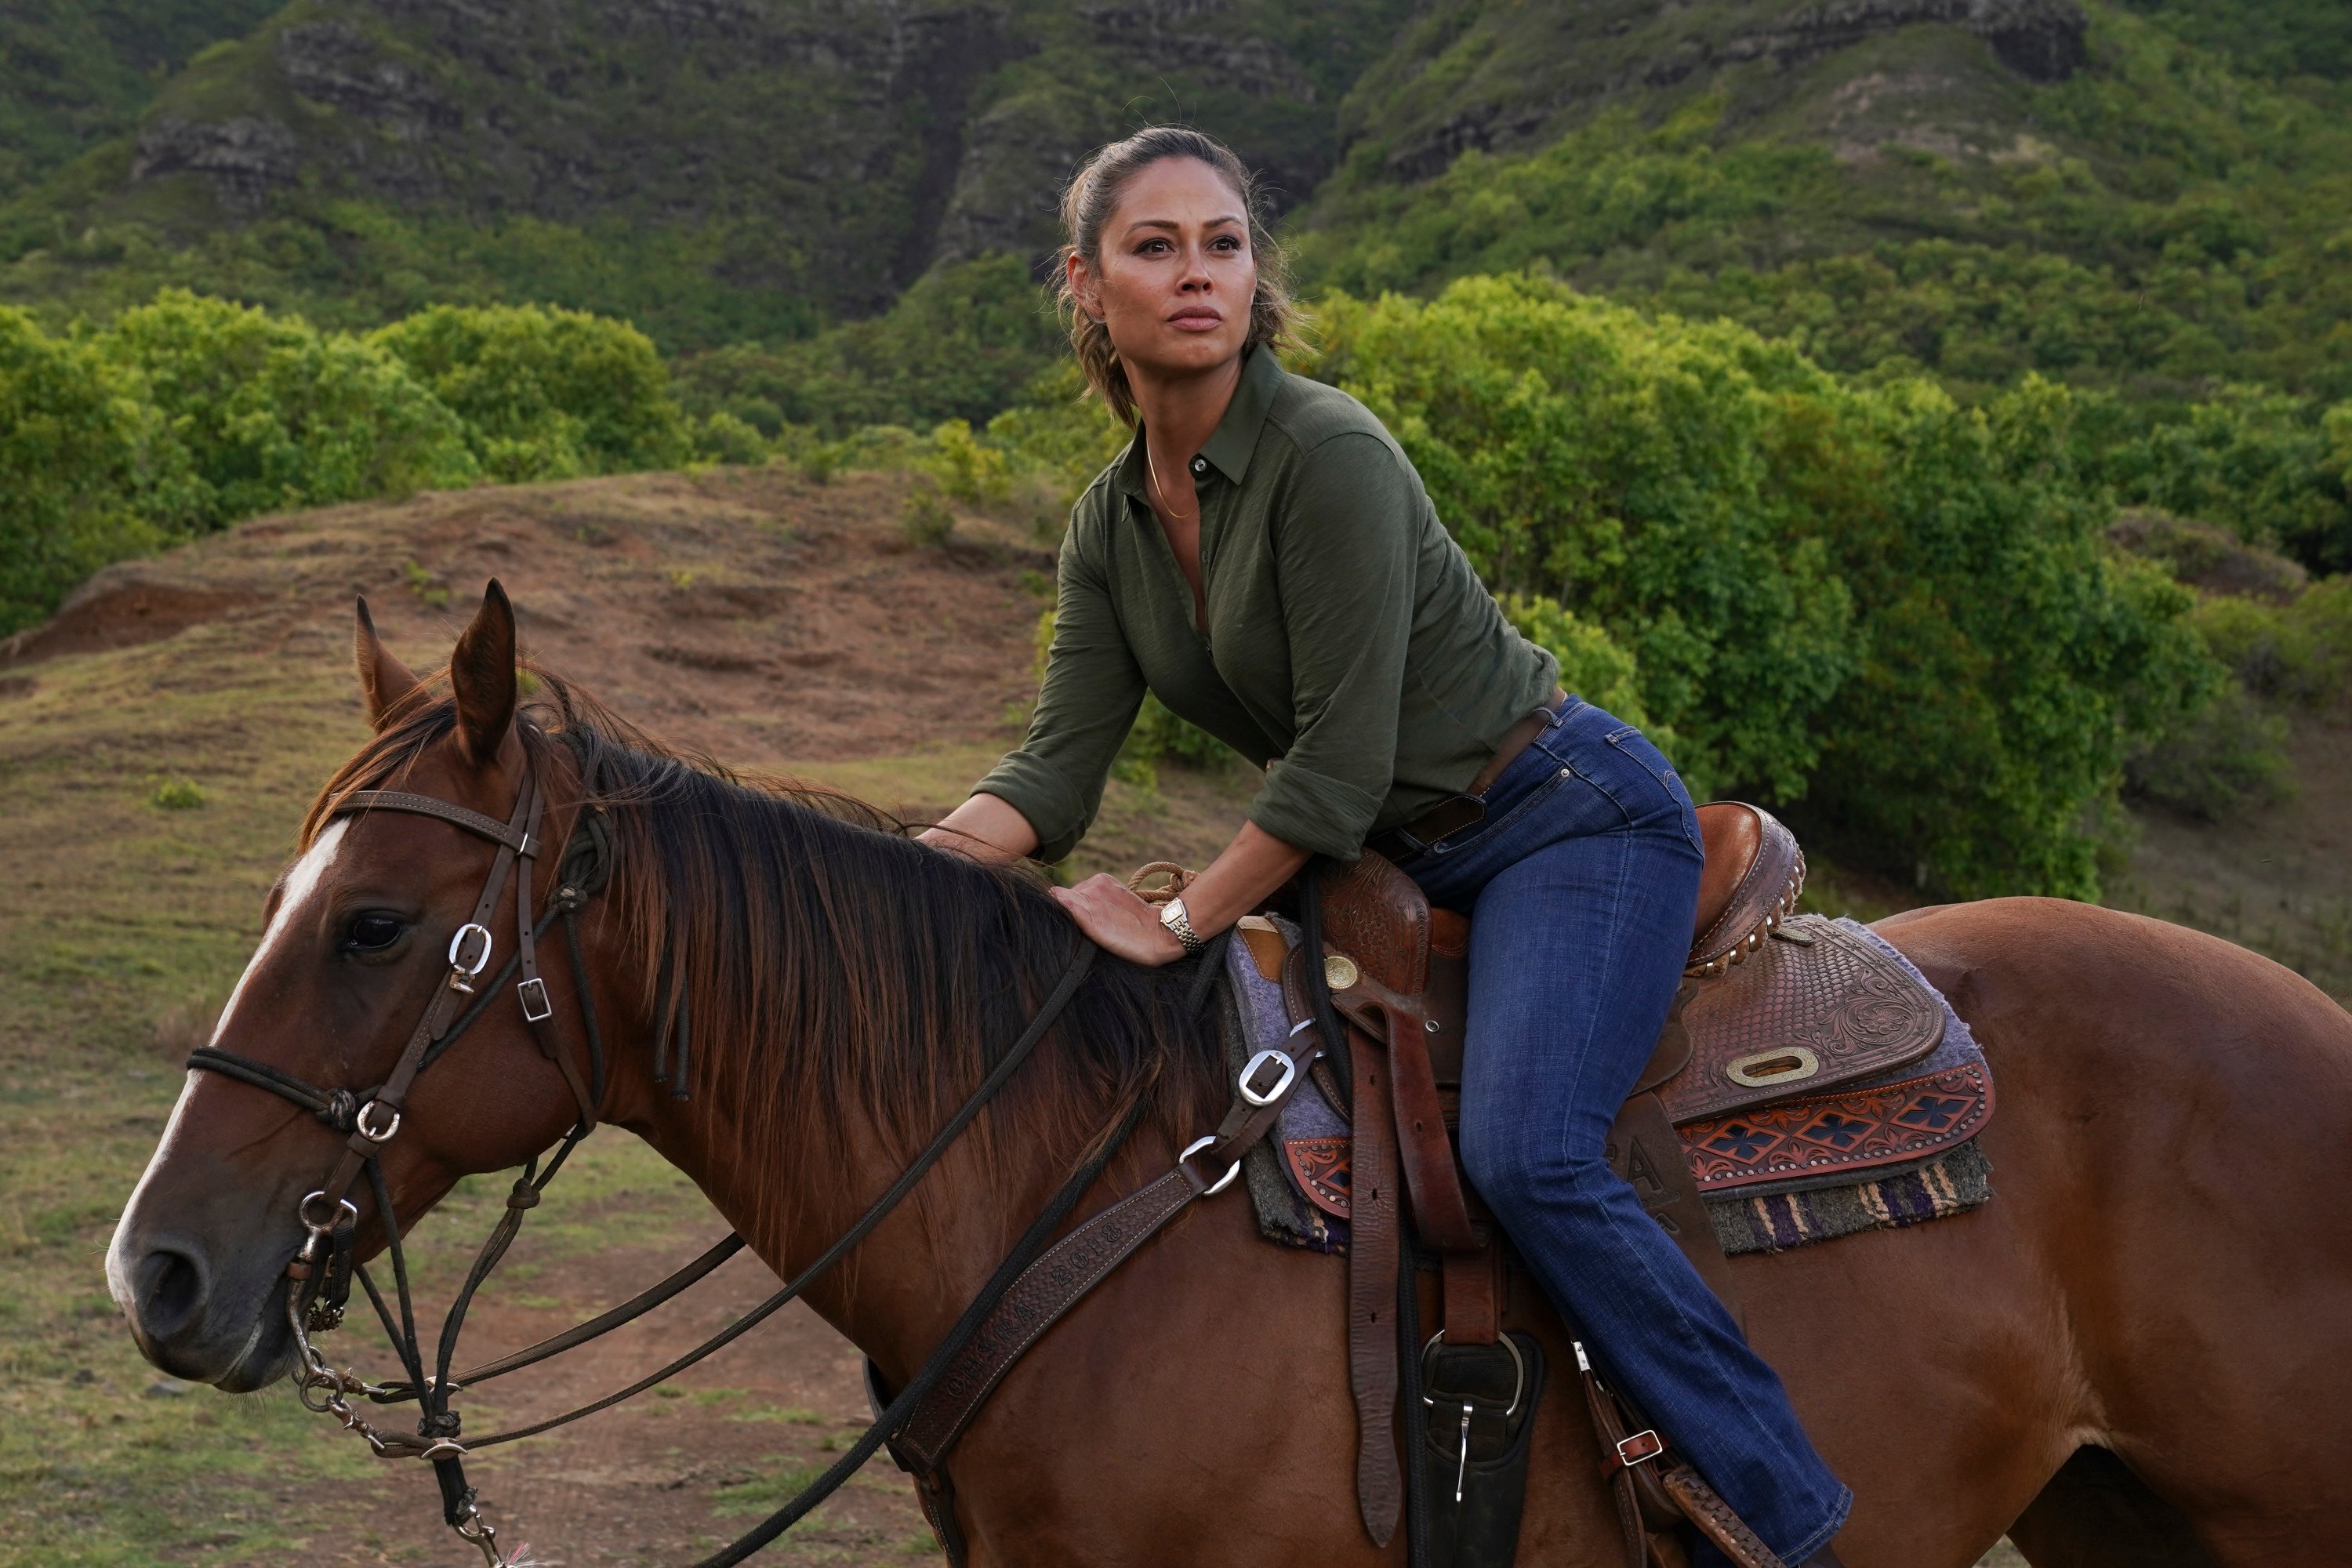 Vanessa Lachey sits on a horse during a scene from 'NCIS: Hawaii'